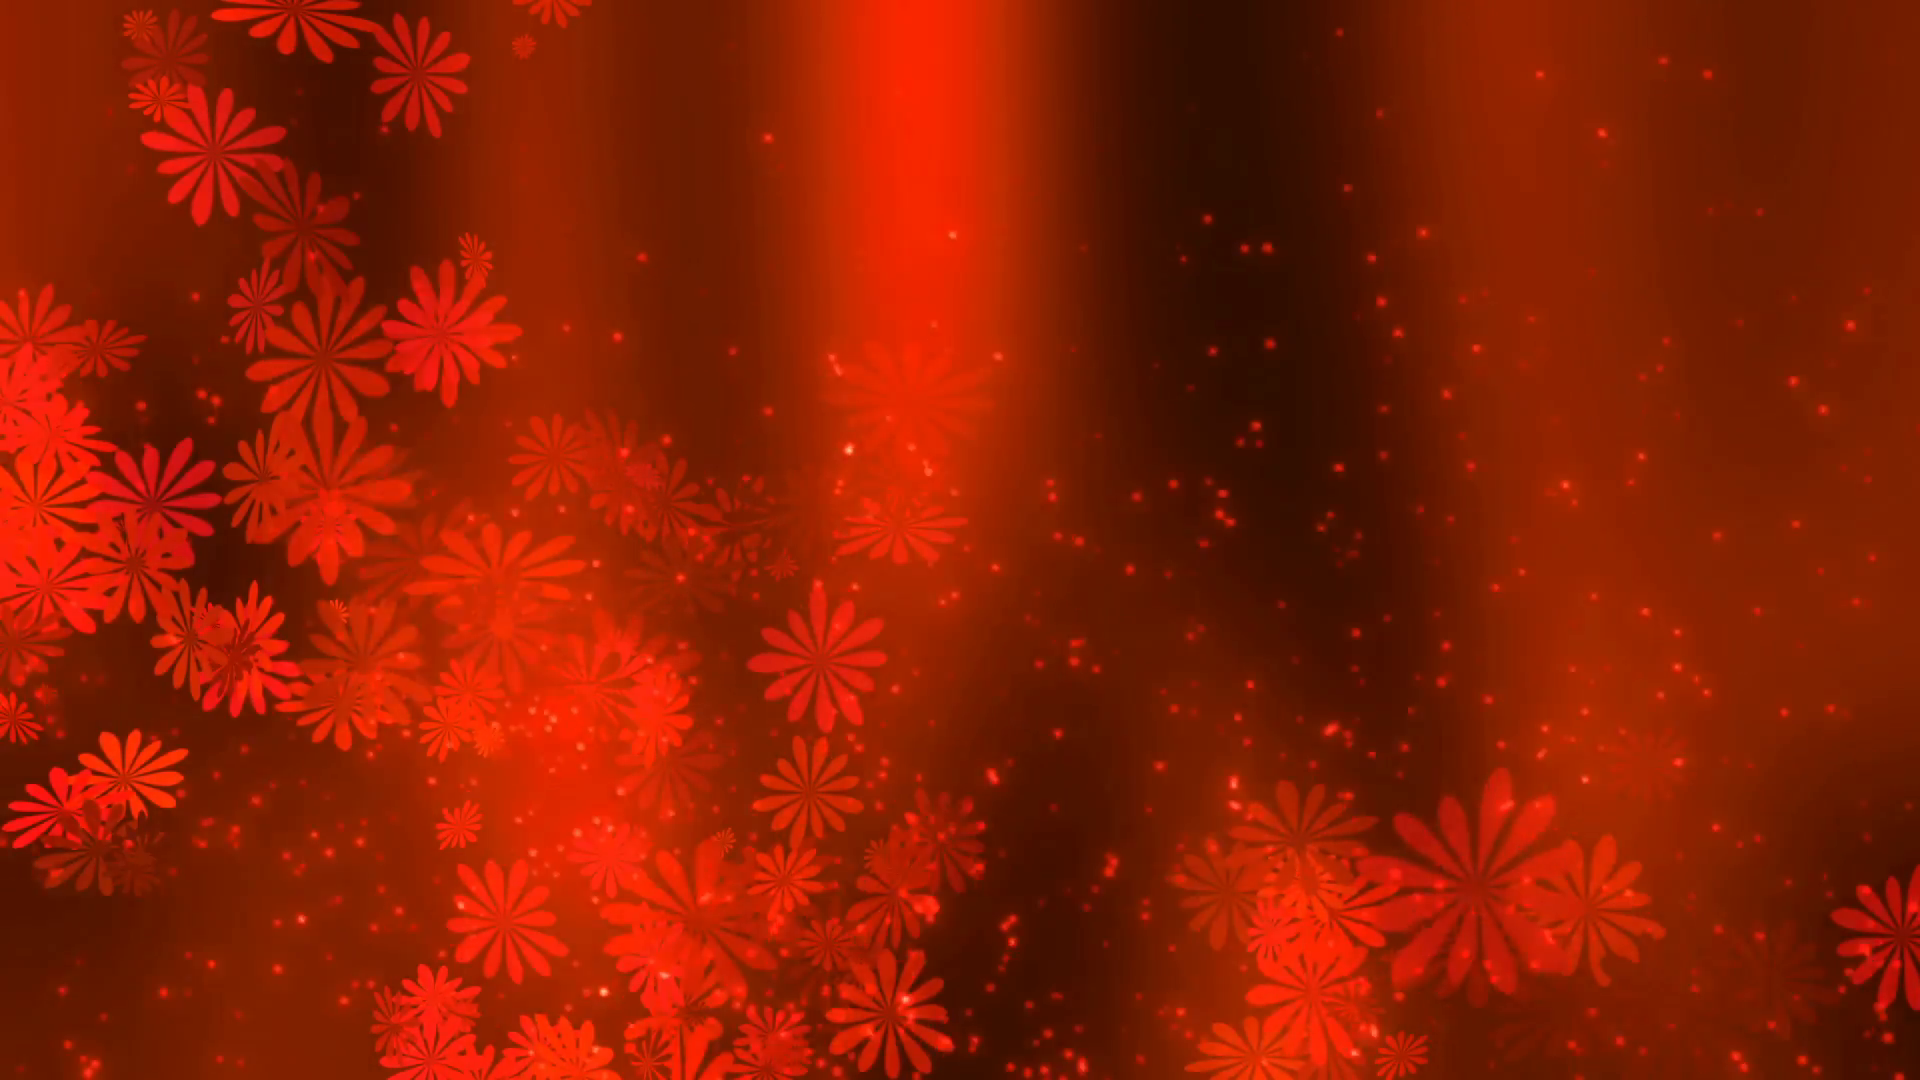 Red Love abstract flower Background 01 Stock Video Footage - Videoblocks